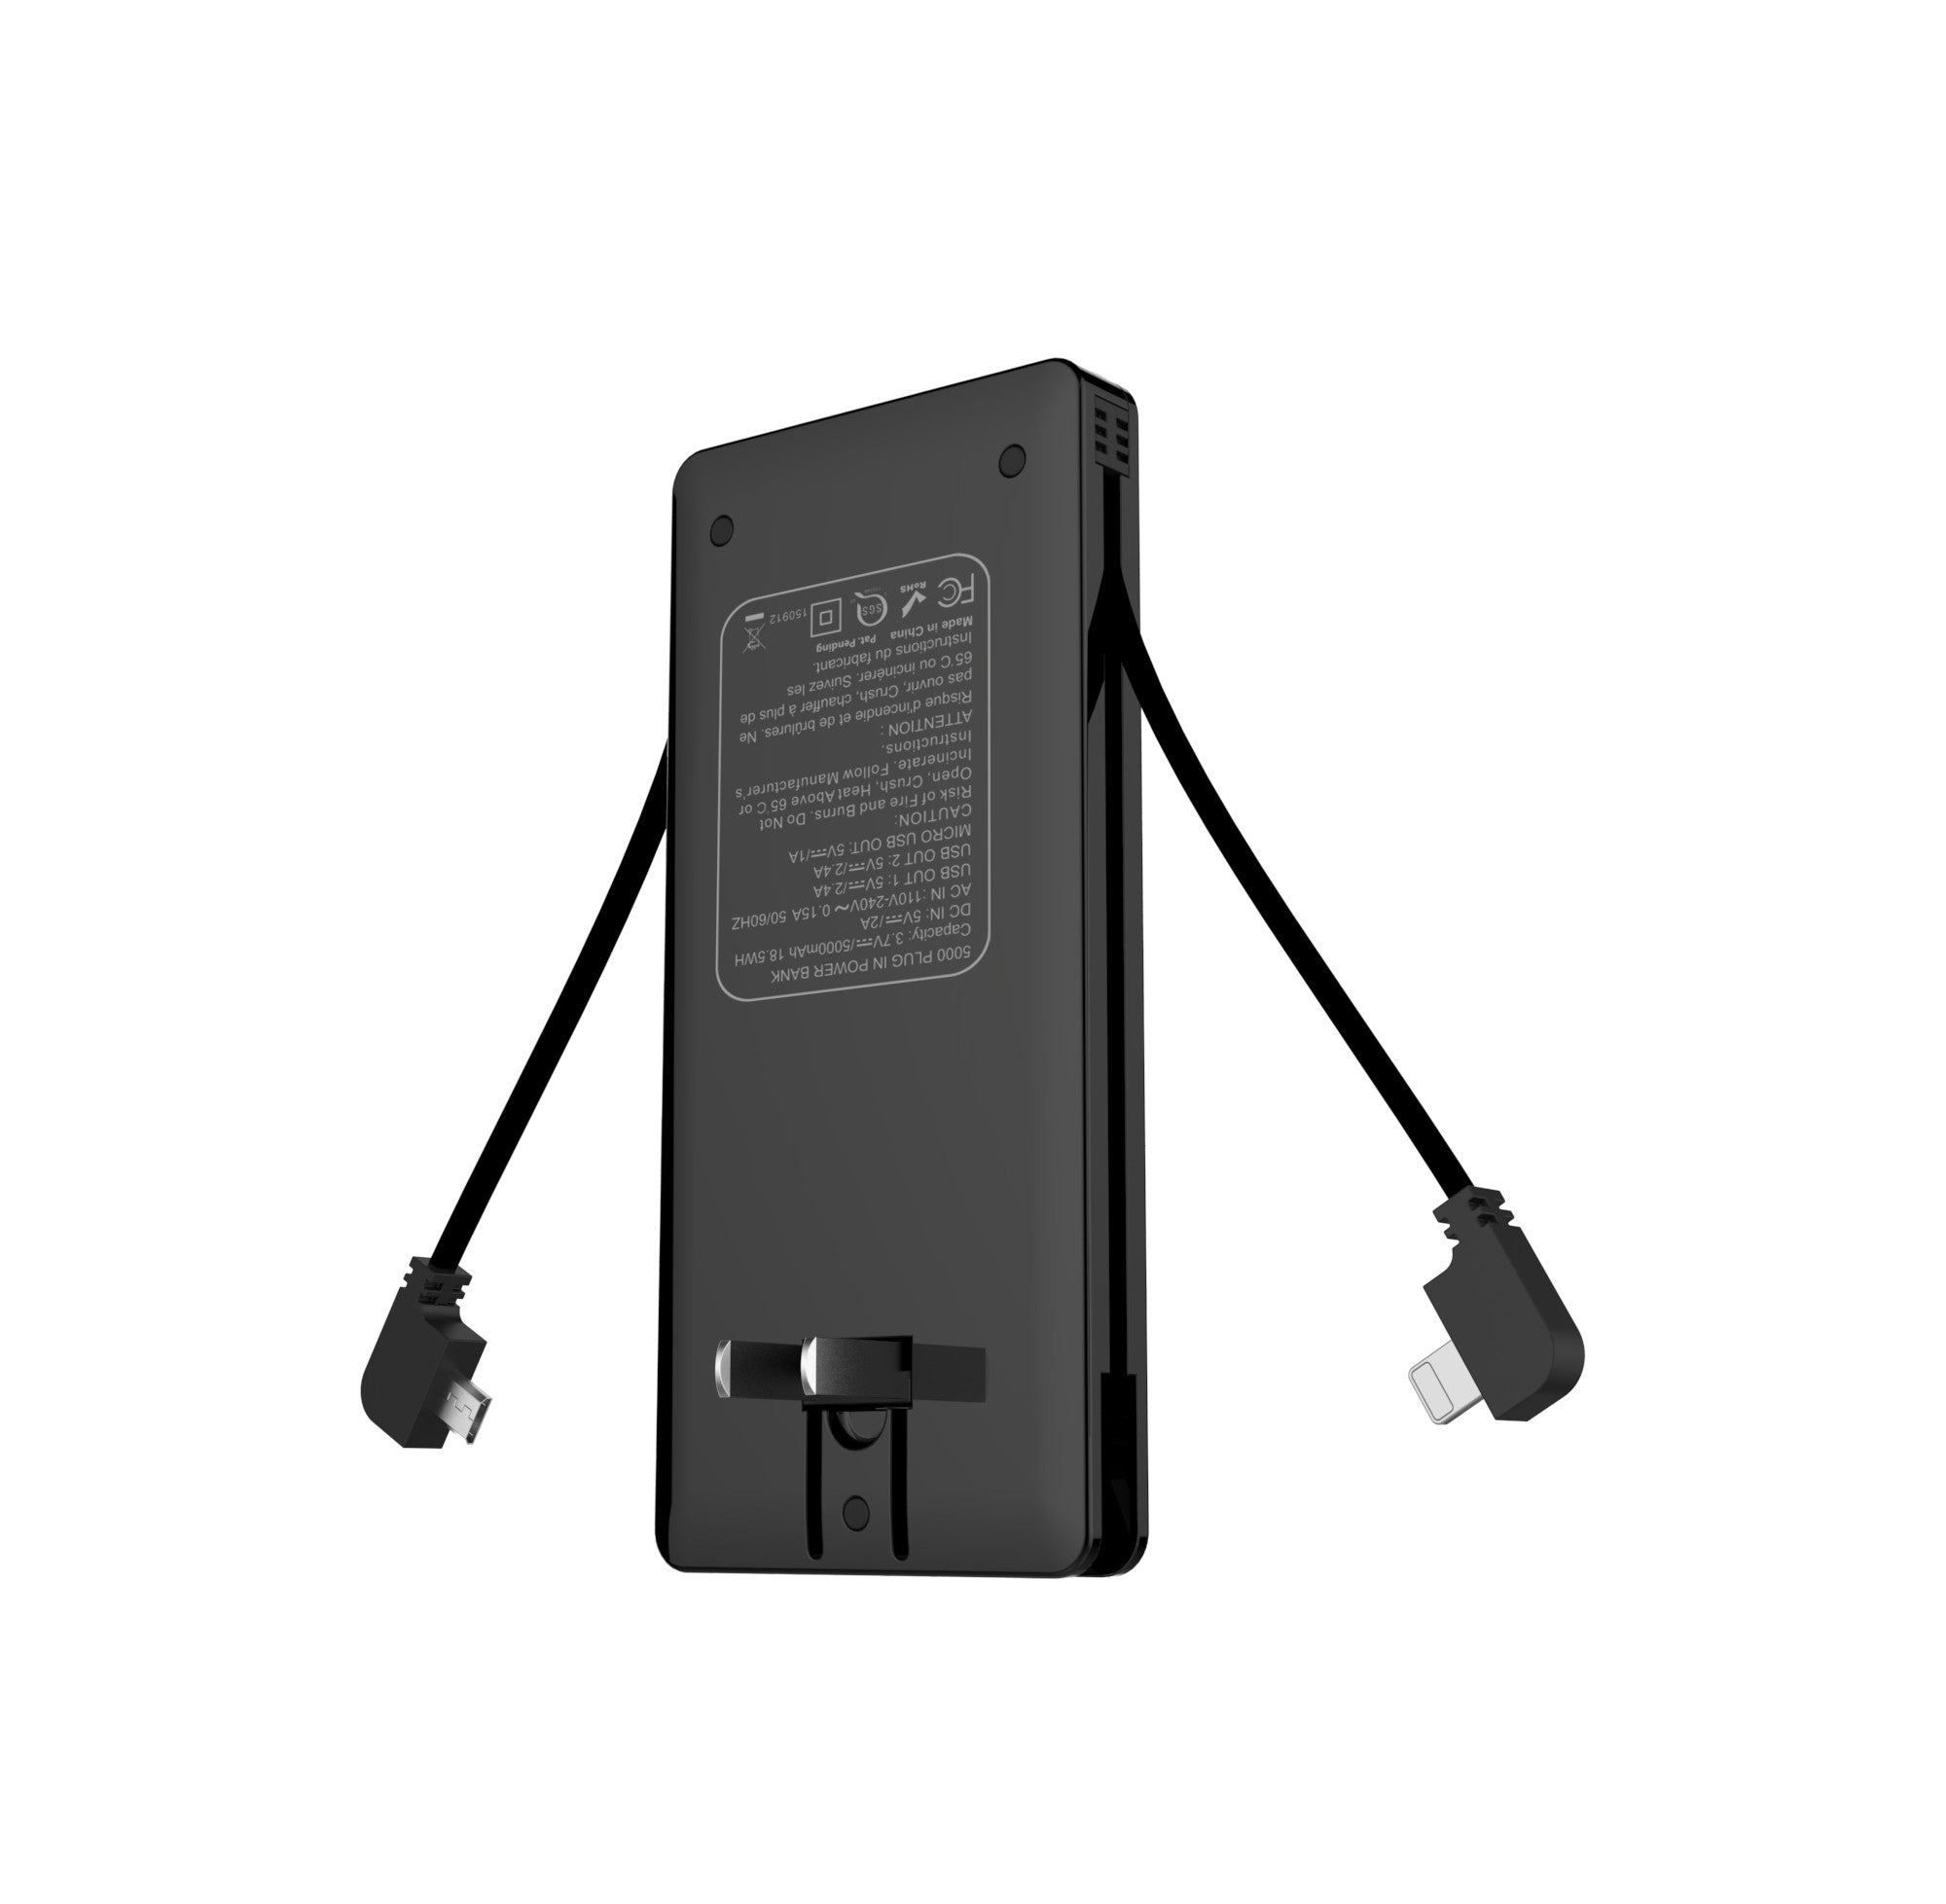 Portable Powerbank Charger With Built In AC , Lightning Cable – Heloideo